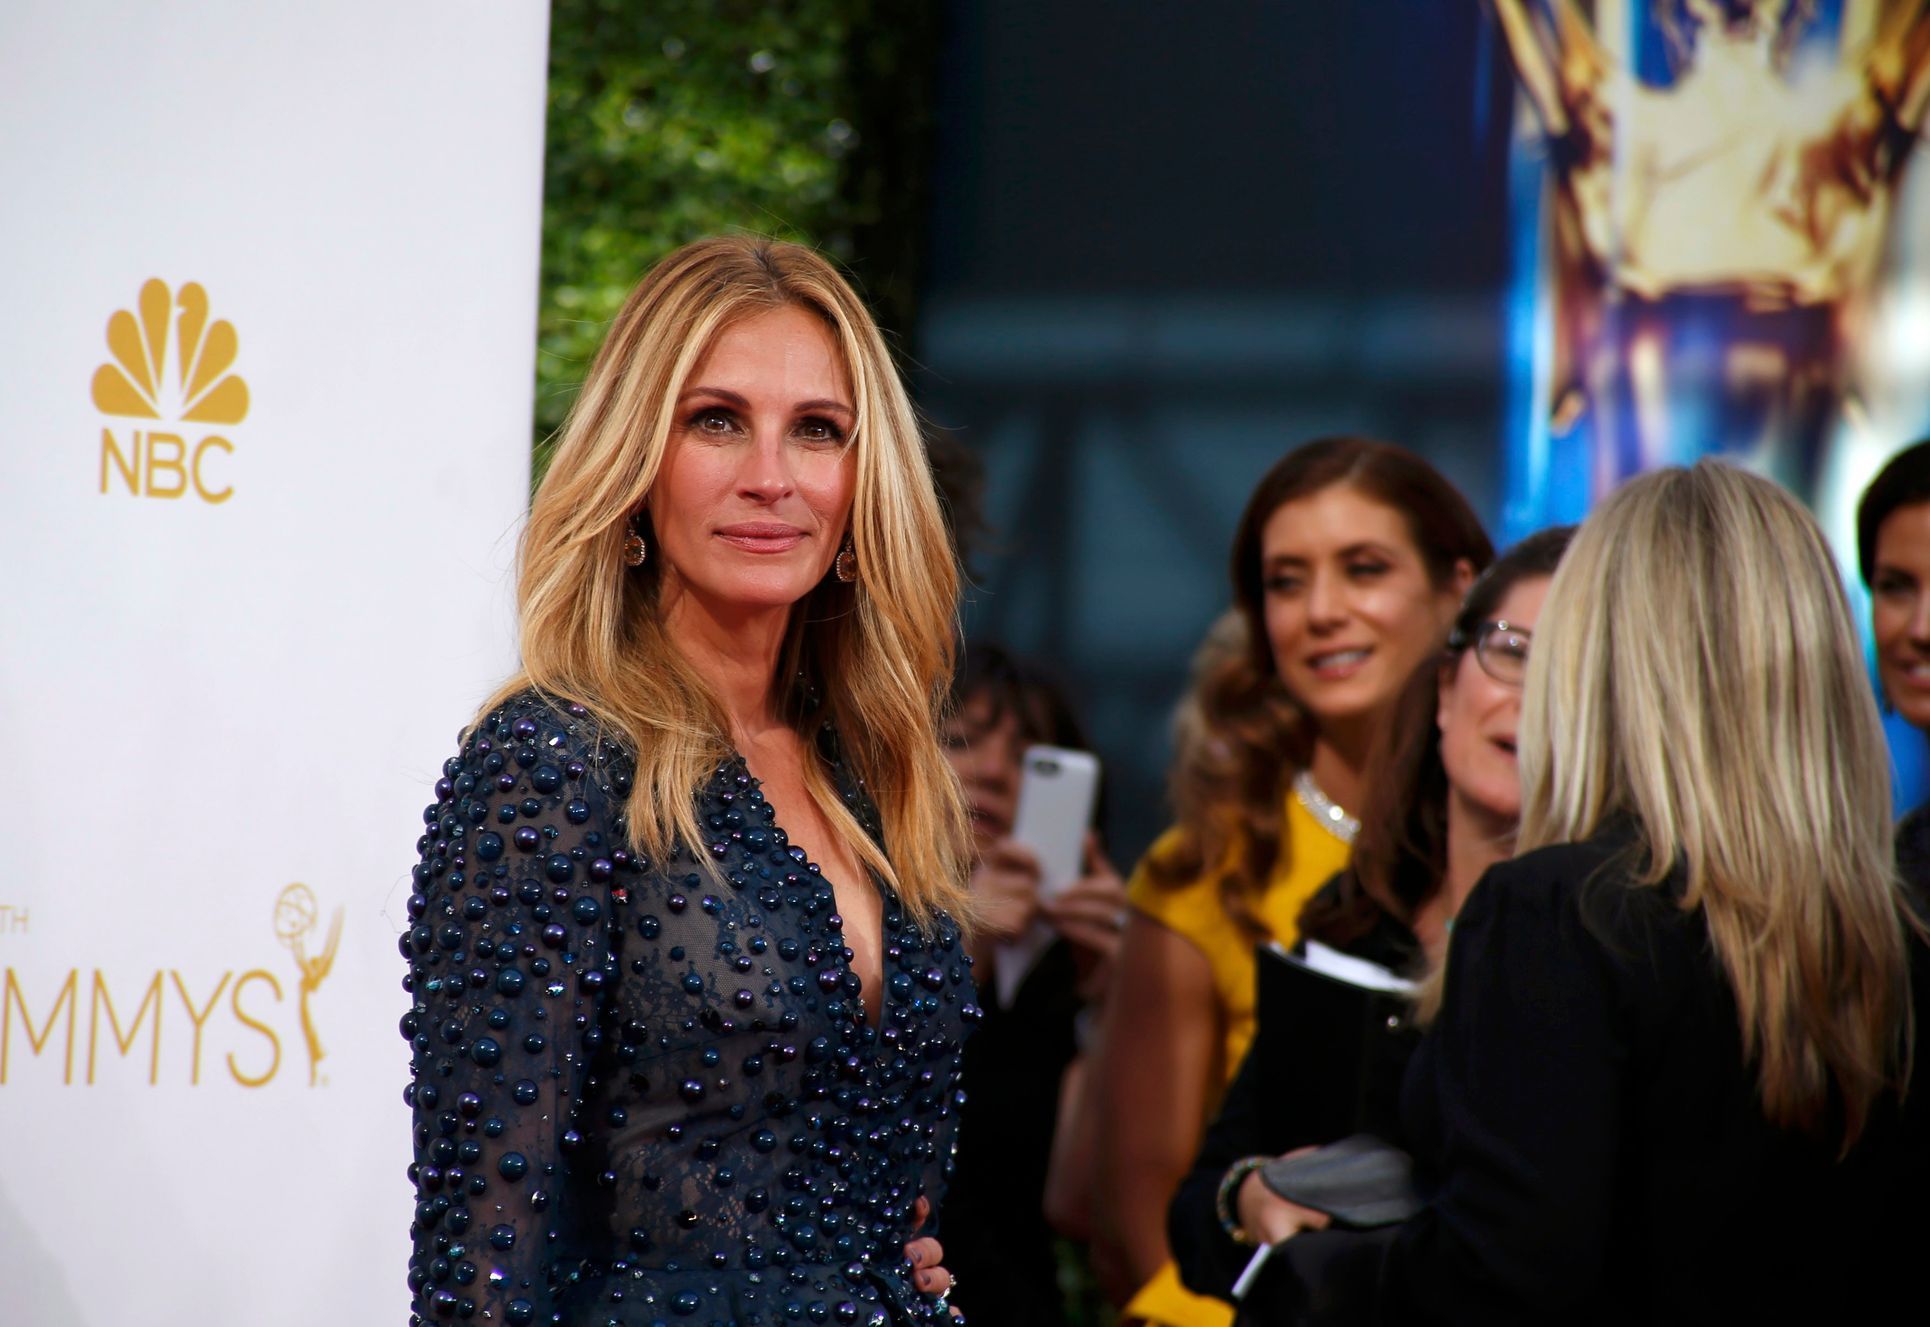 Julia Roberts from HBO's &quot;The Normal Heart&quot; arrives at the 66th Primetime Emmy Awards in Los Angeles